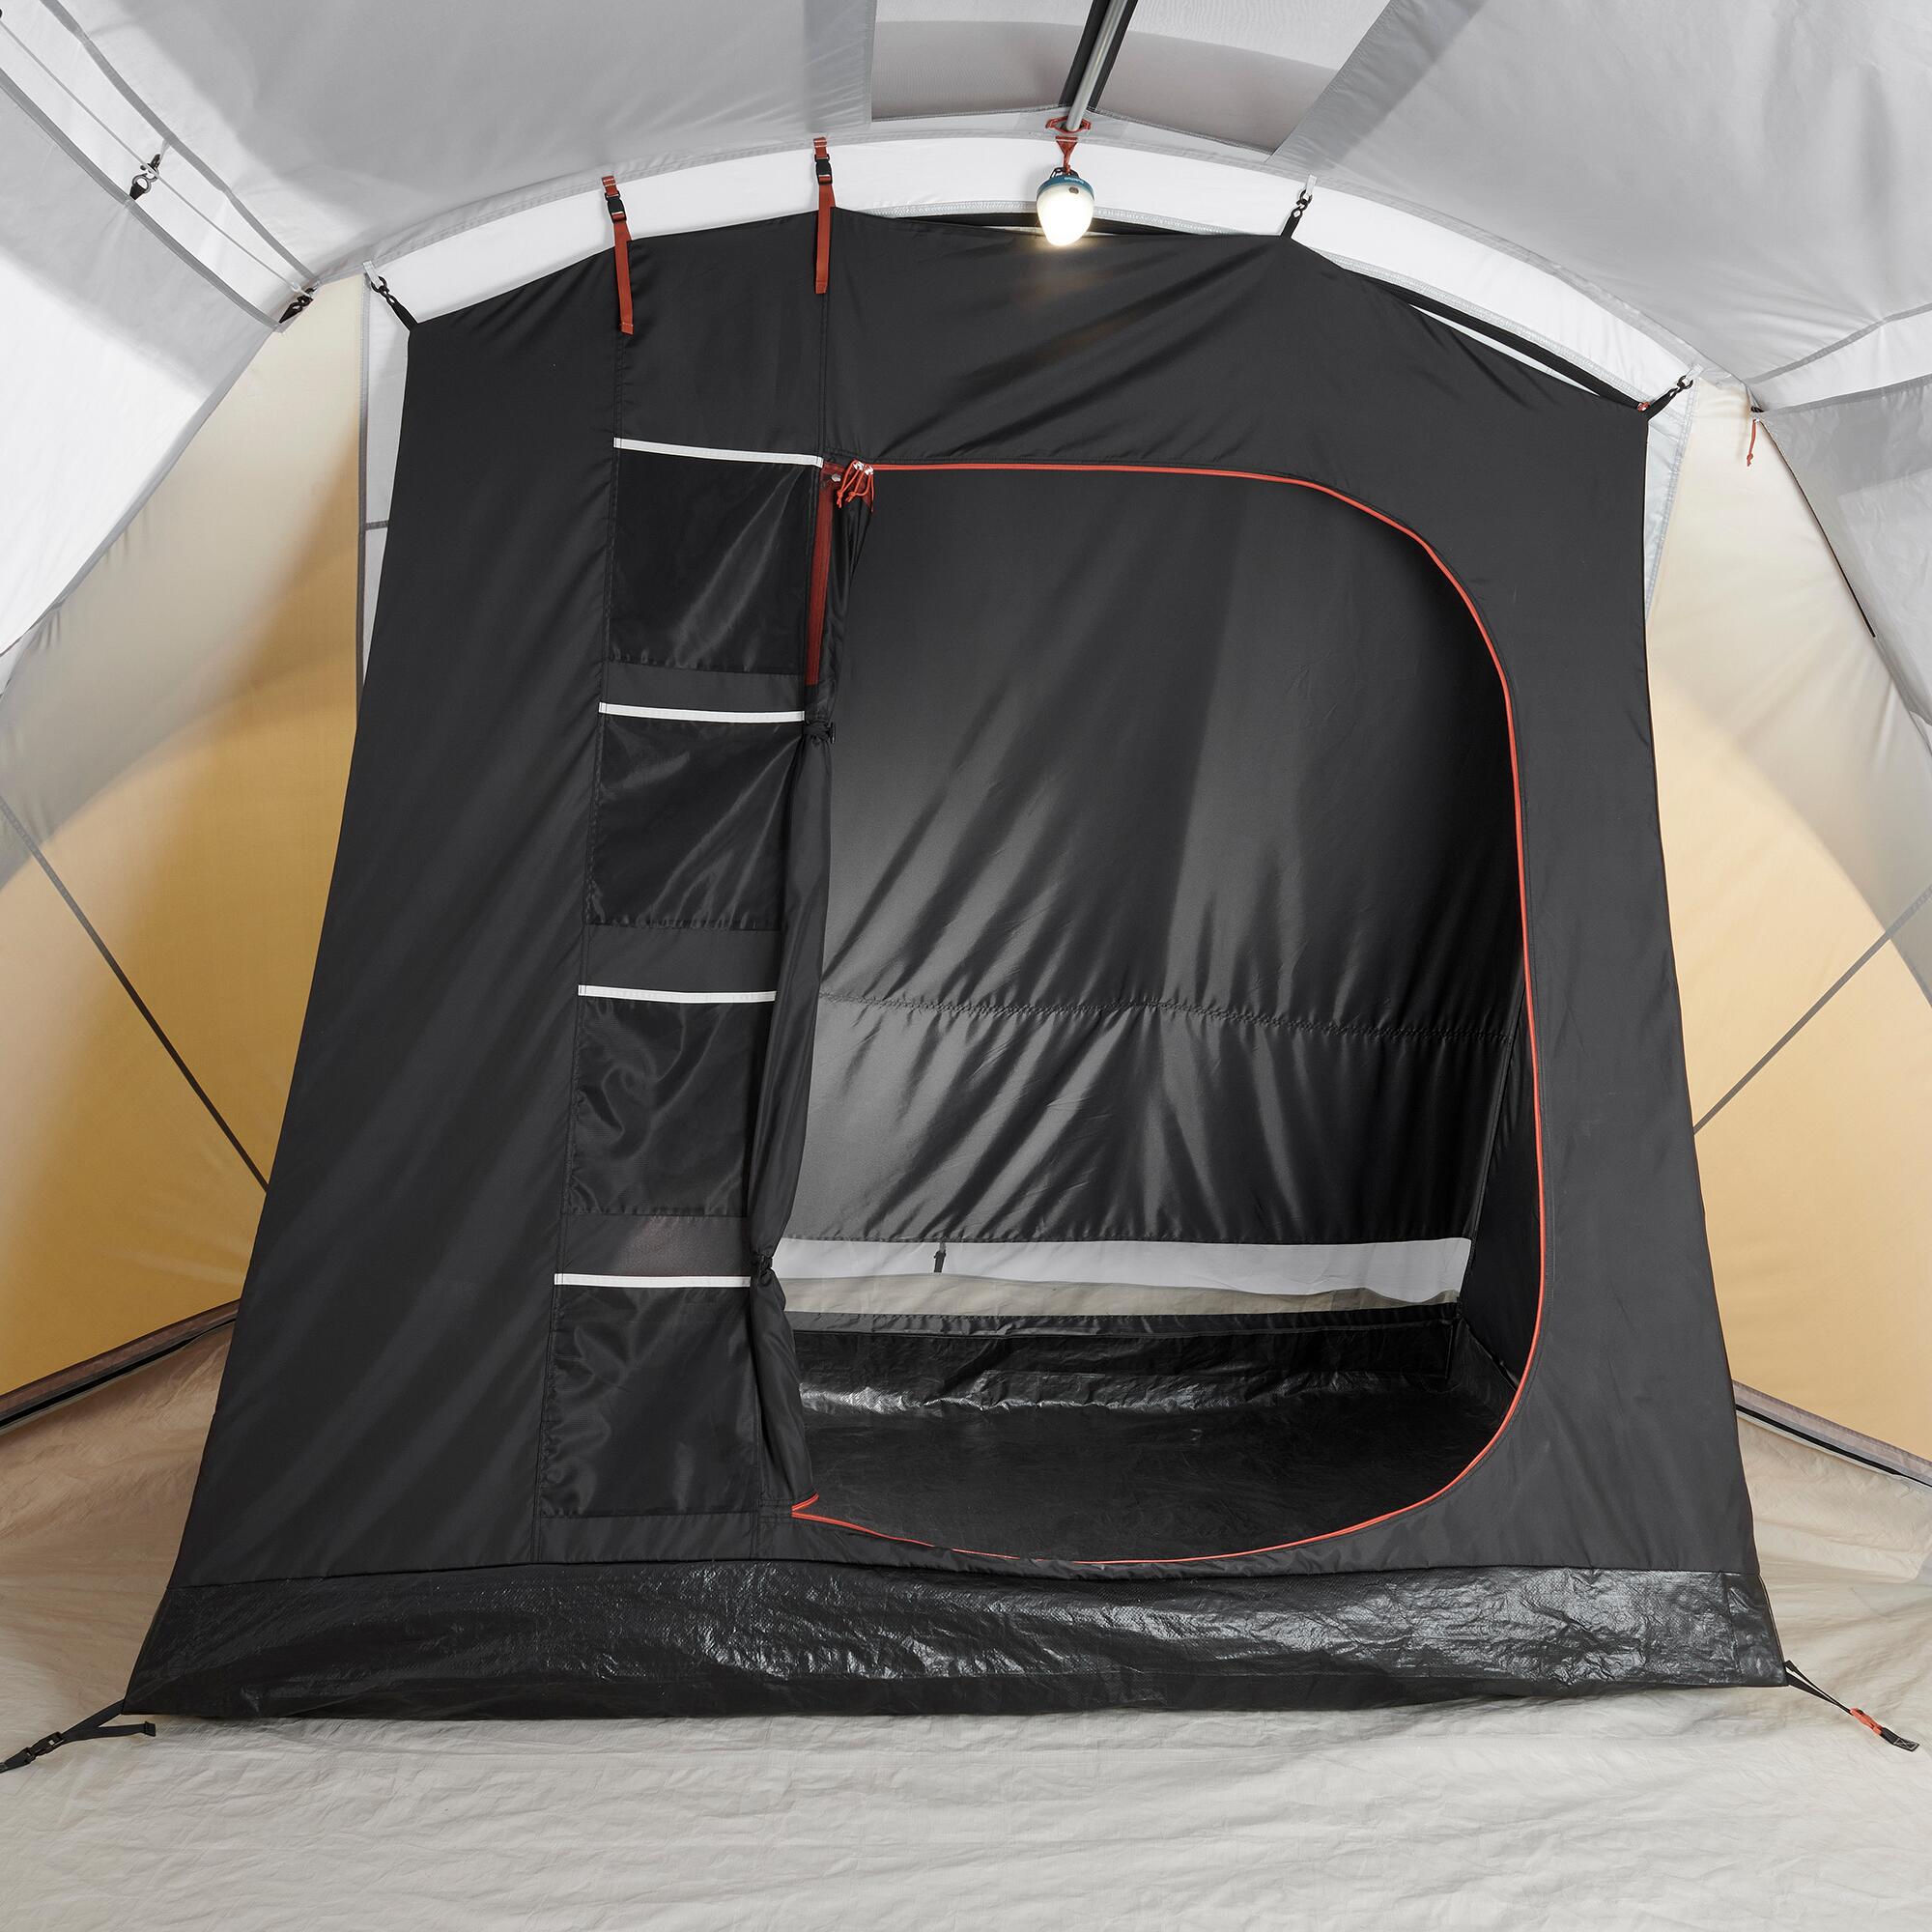 Quechua Bedroom And Groundsheet - Spare Parts For The Air Seconds 6.3 Xl F&b Tent